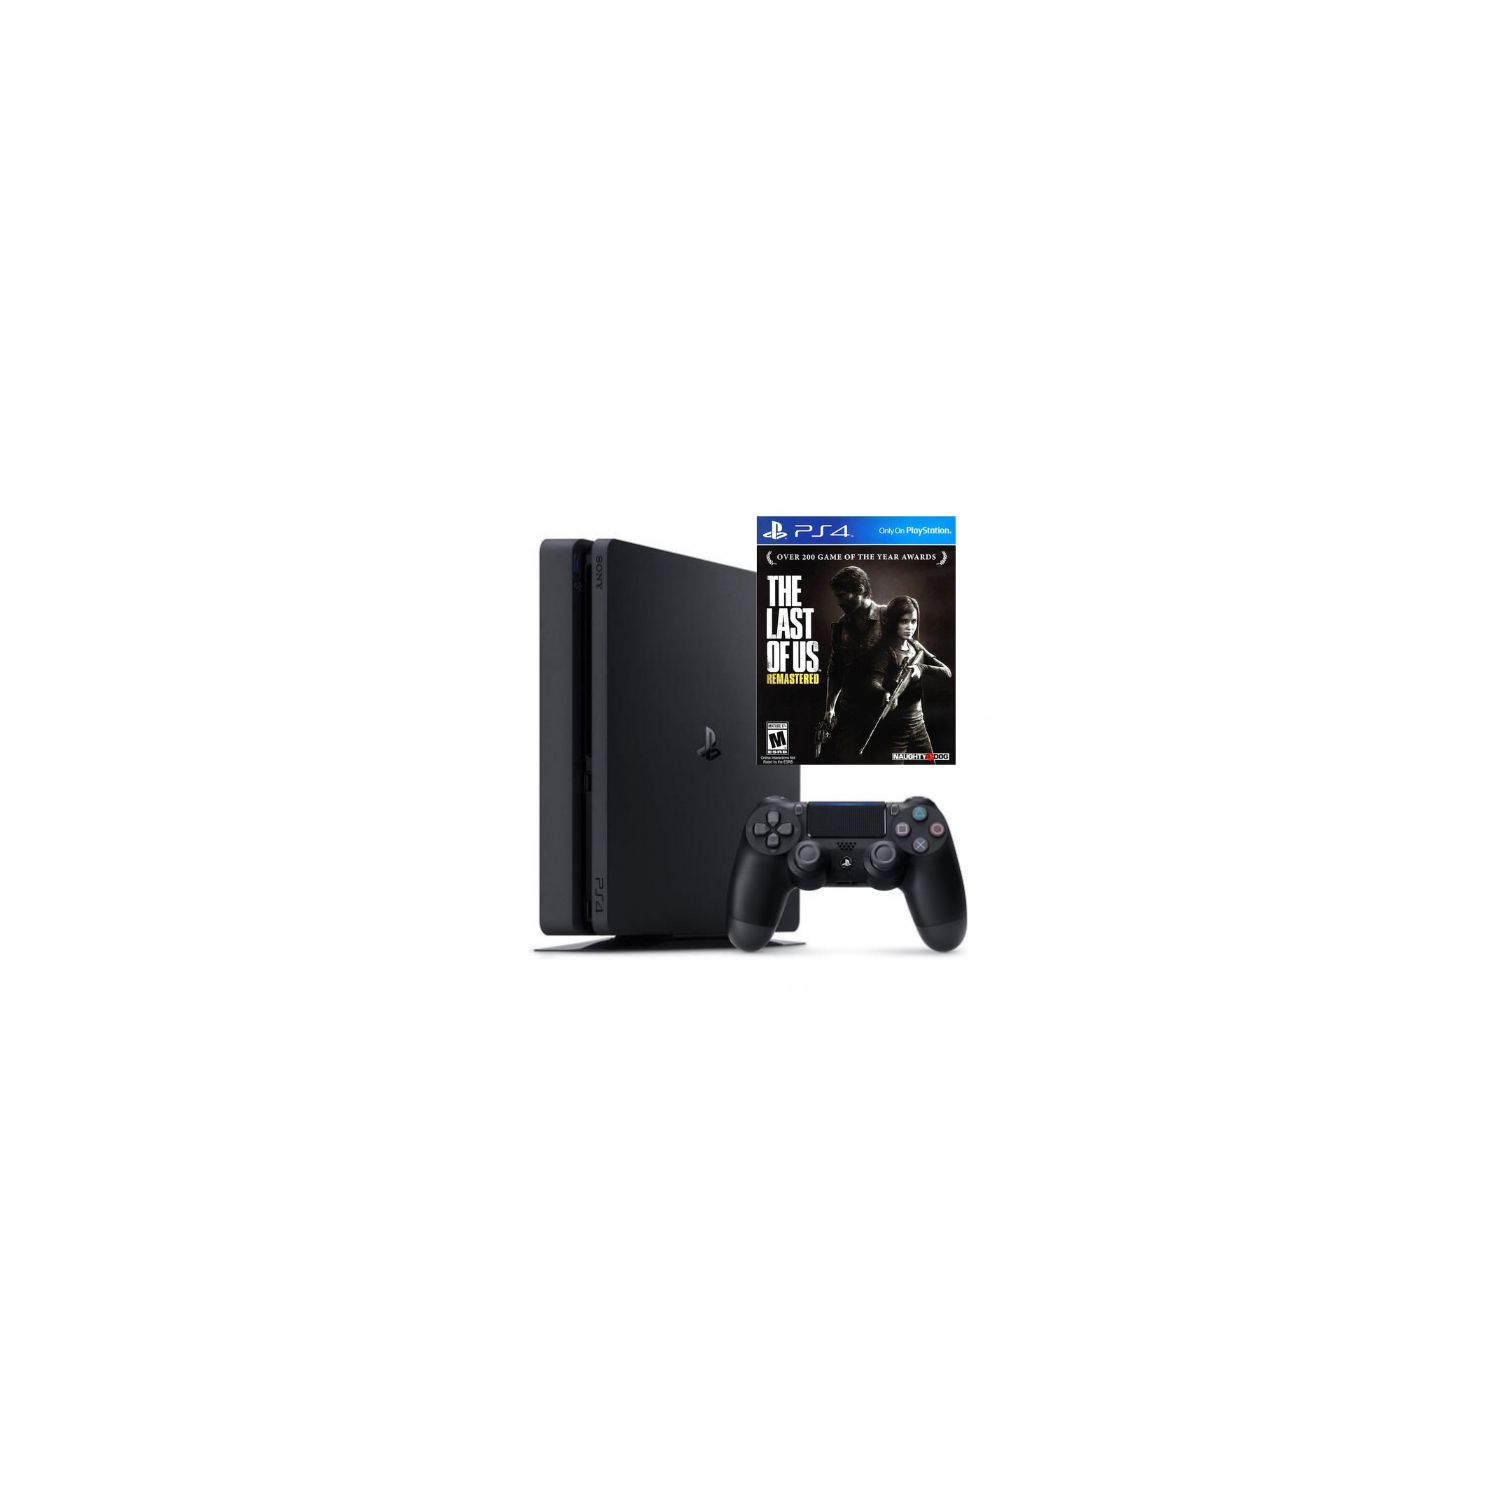 Refurbished (Good) - Sony PlayStation 4 Slim 1TB Console + THE LAST OF US GAME